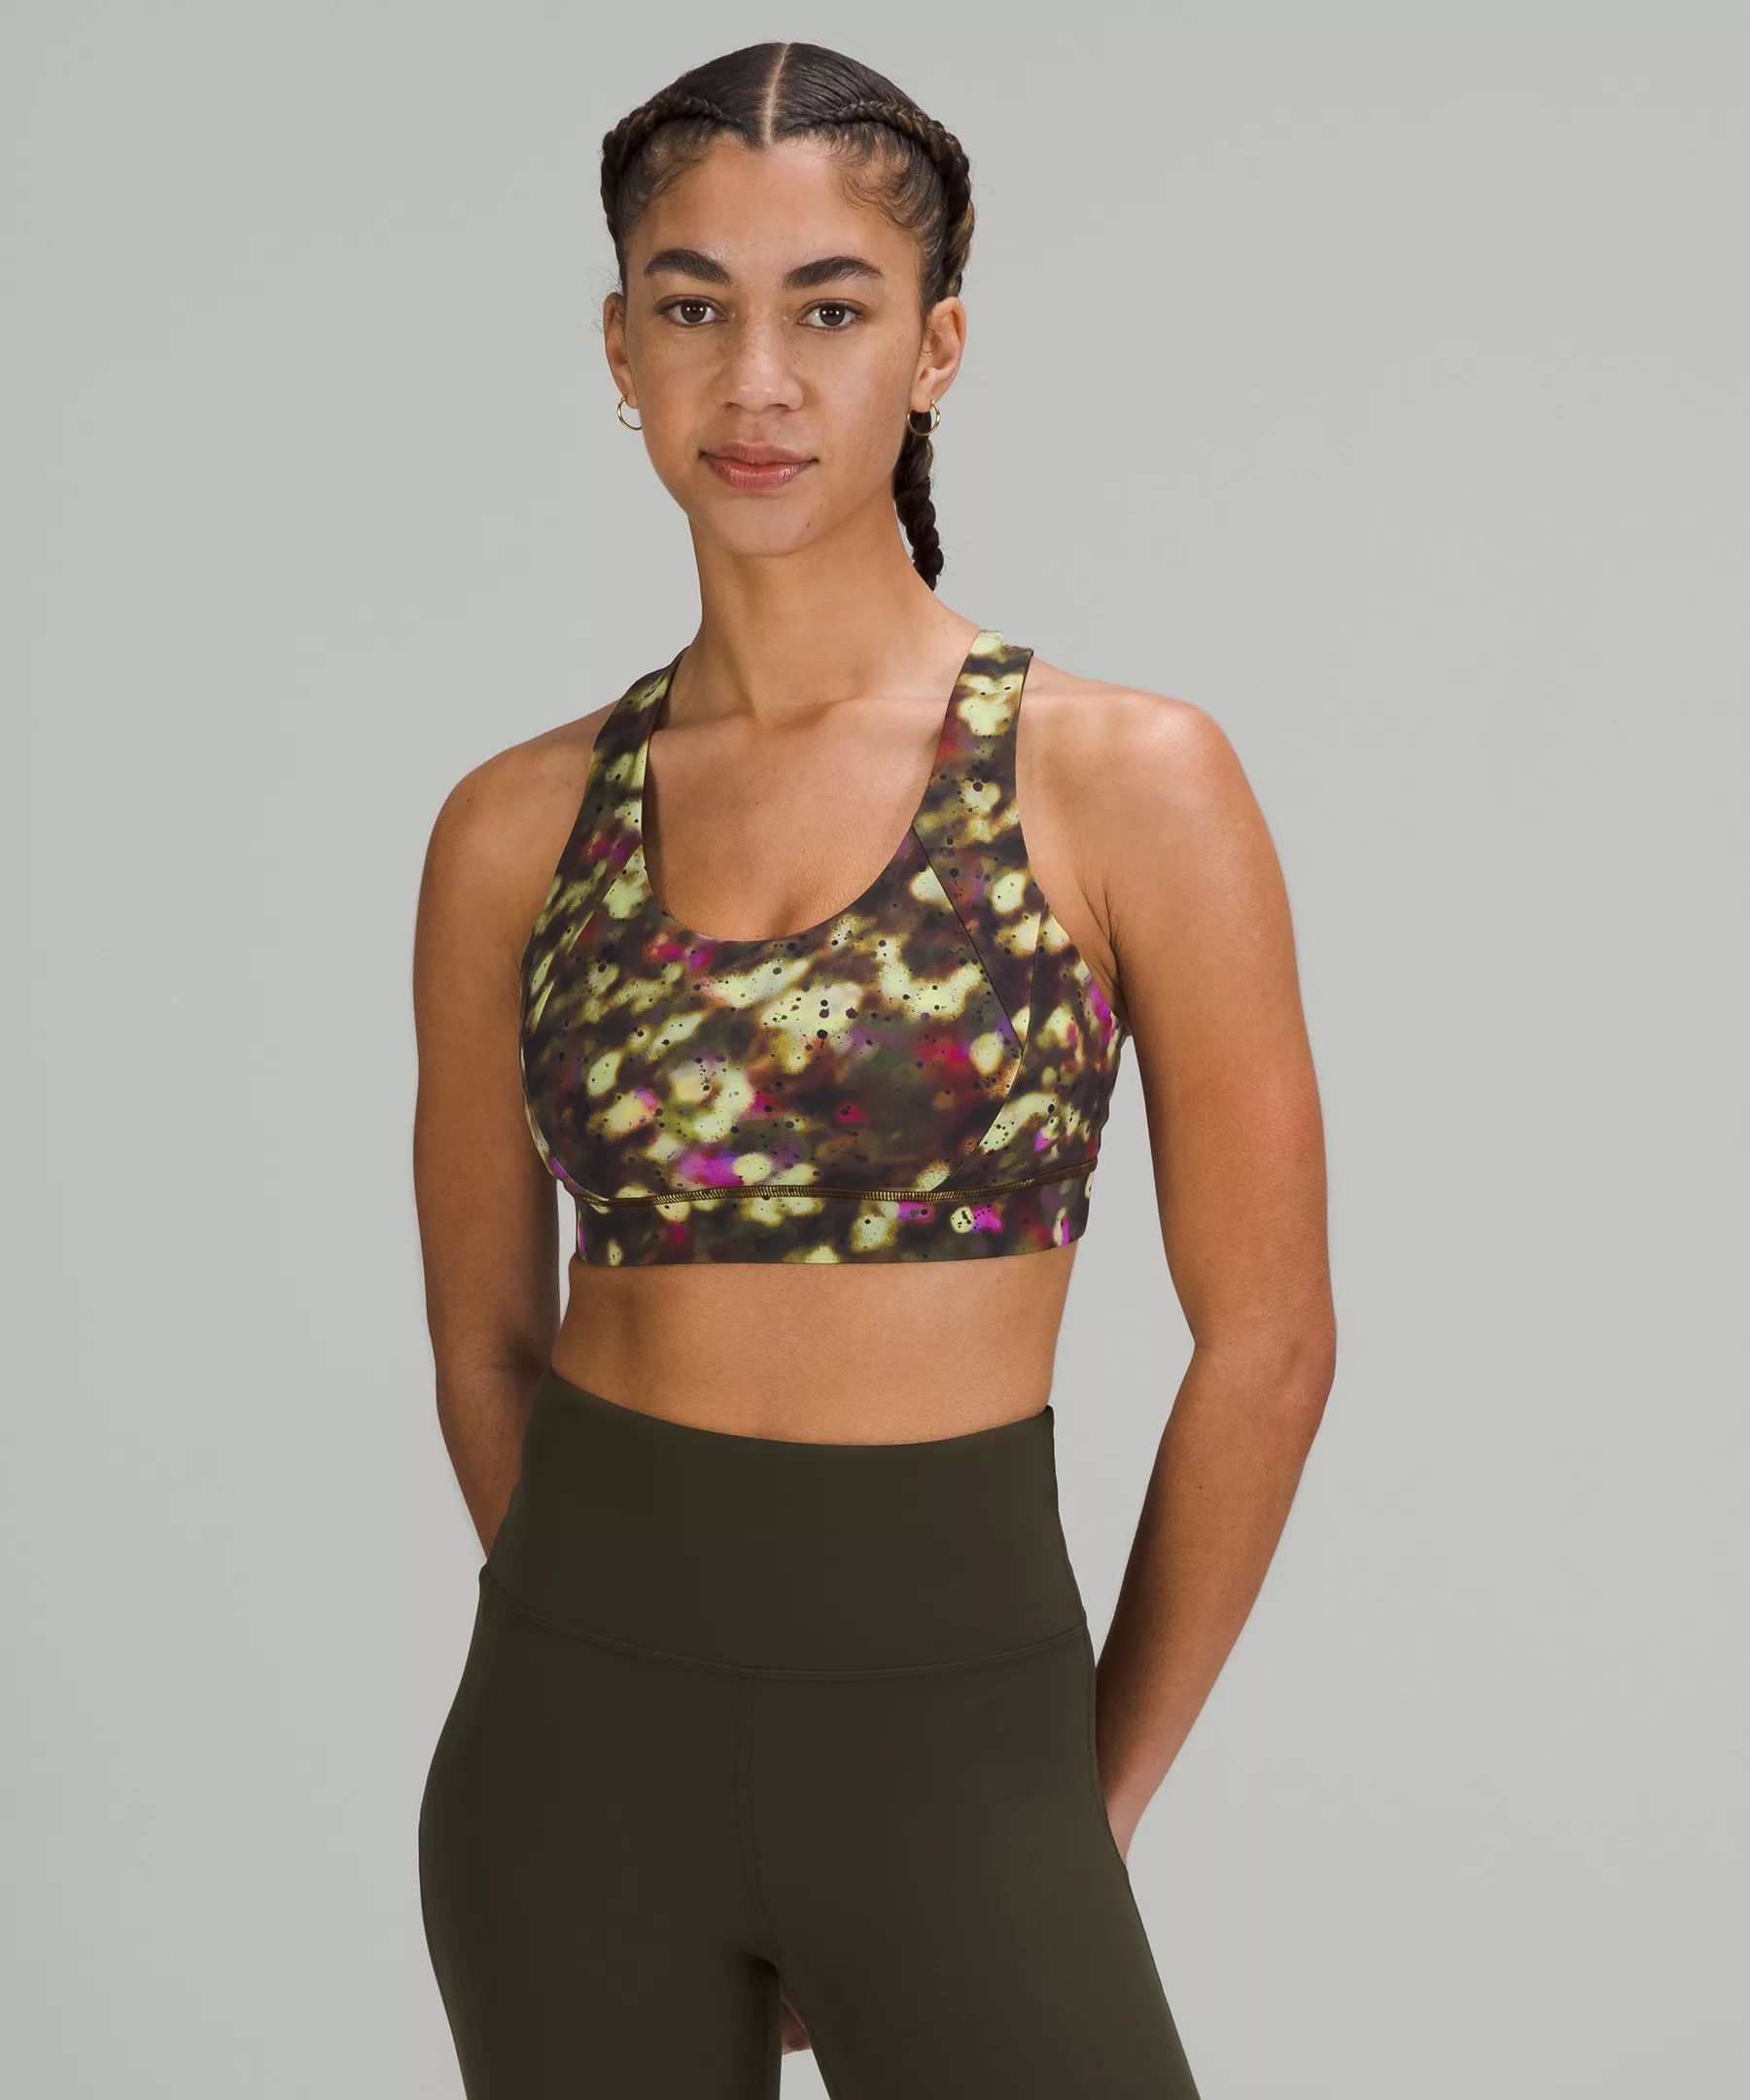 Free to Be Elevated Bra Light Support, DD/DDD(E) Cup | Lululemon (US)